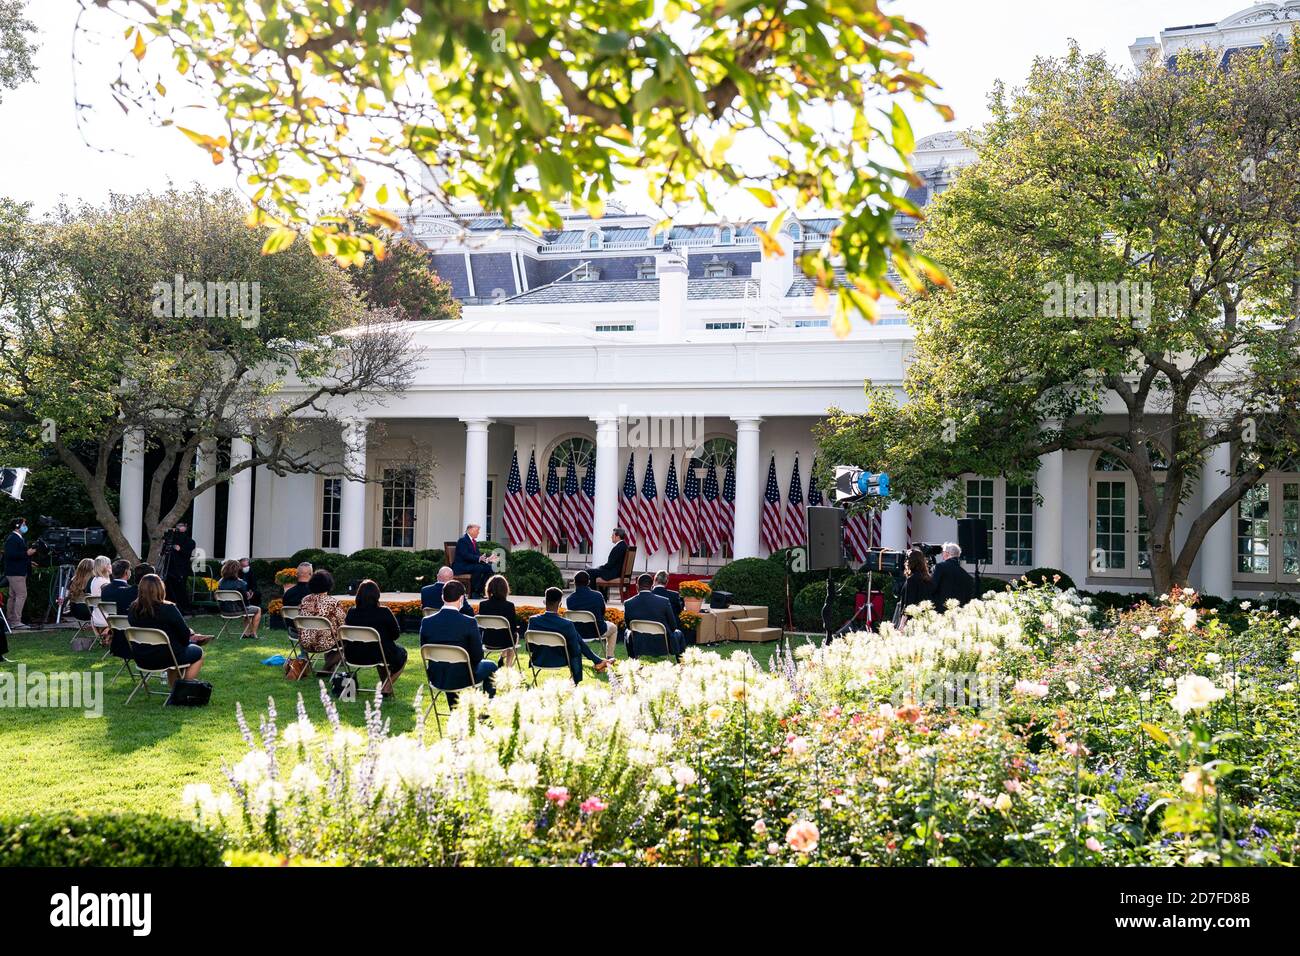 U.S. President Donald Trump, participates in a Sinclair Broadcast town hall event with host Eric Bolling in the Rose Garden of the White House October 20, 2020 in Washington, D.C. Sinclair is a conservative media outlet competing with Fox News. Stock Photo